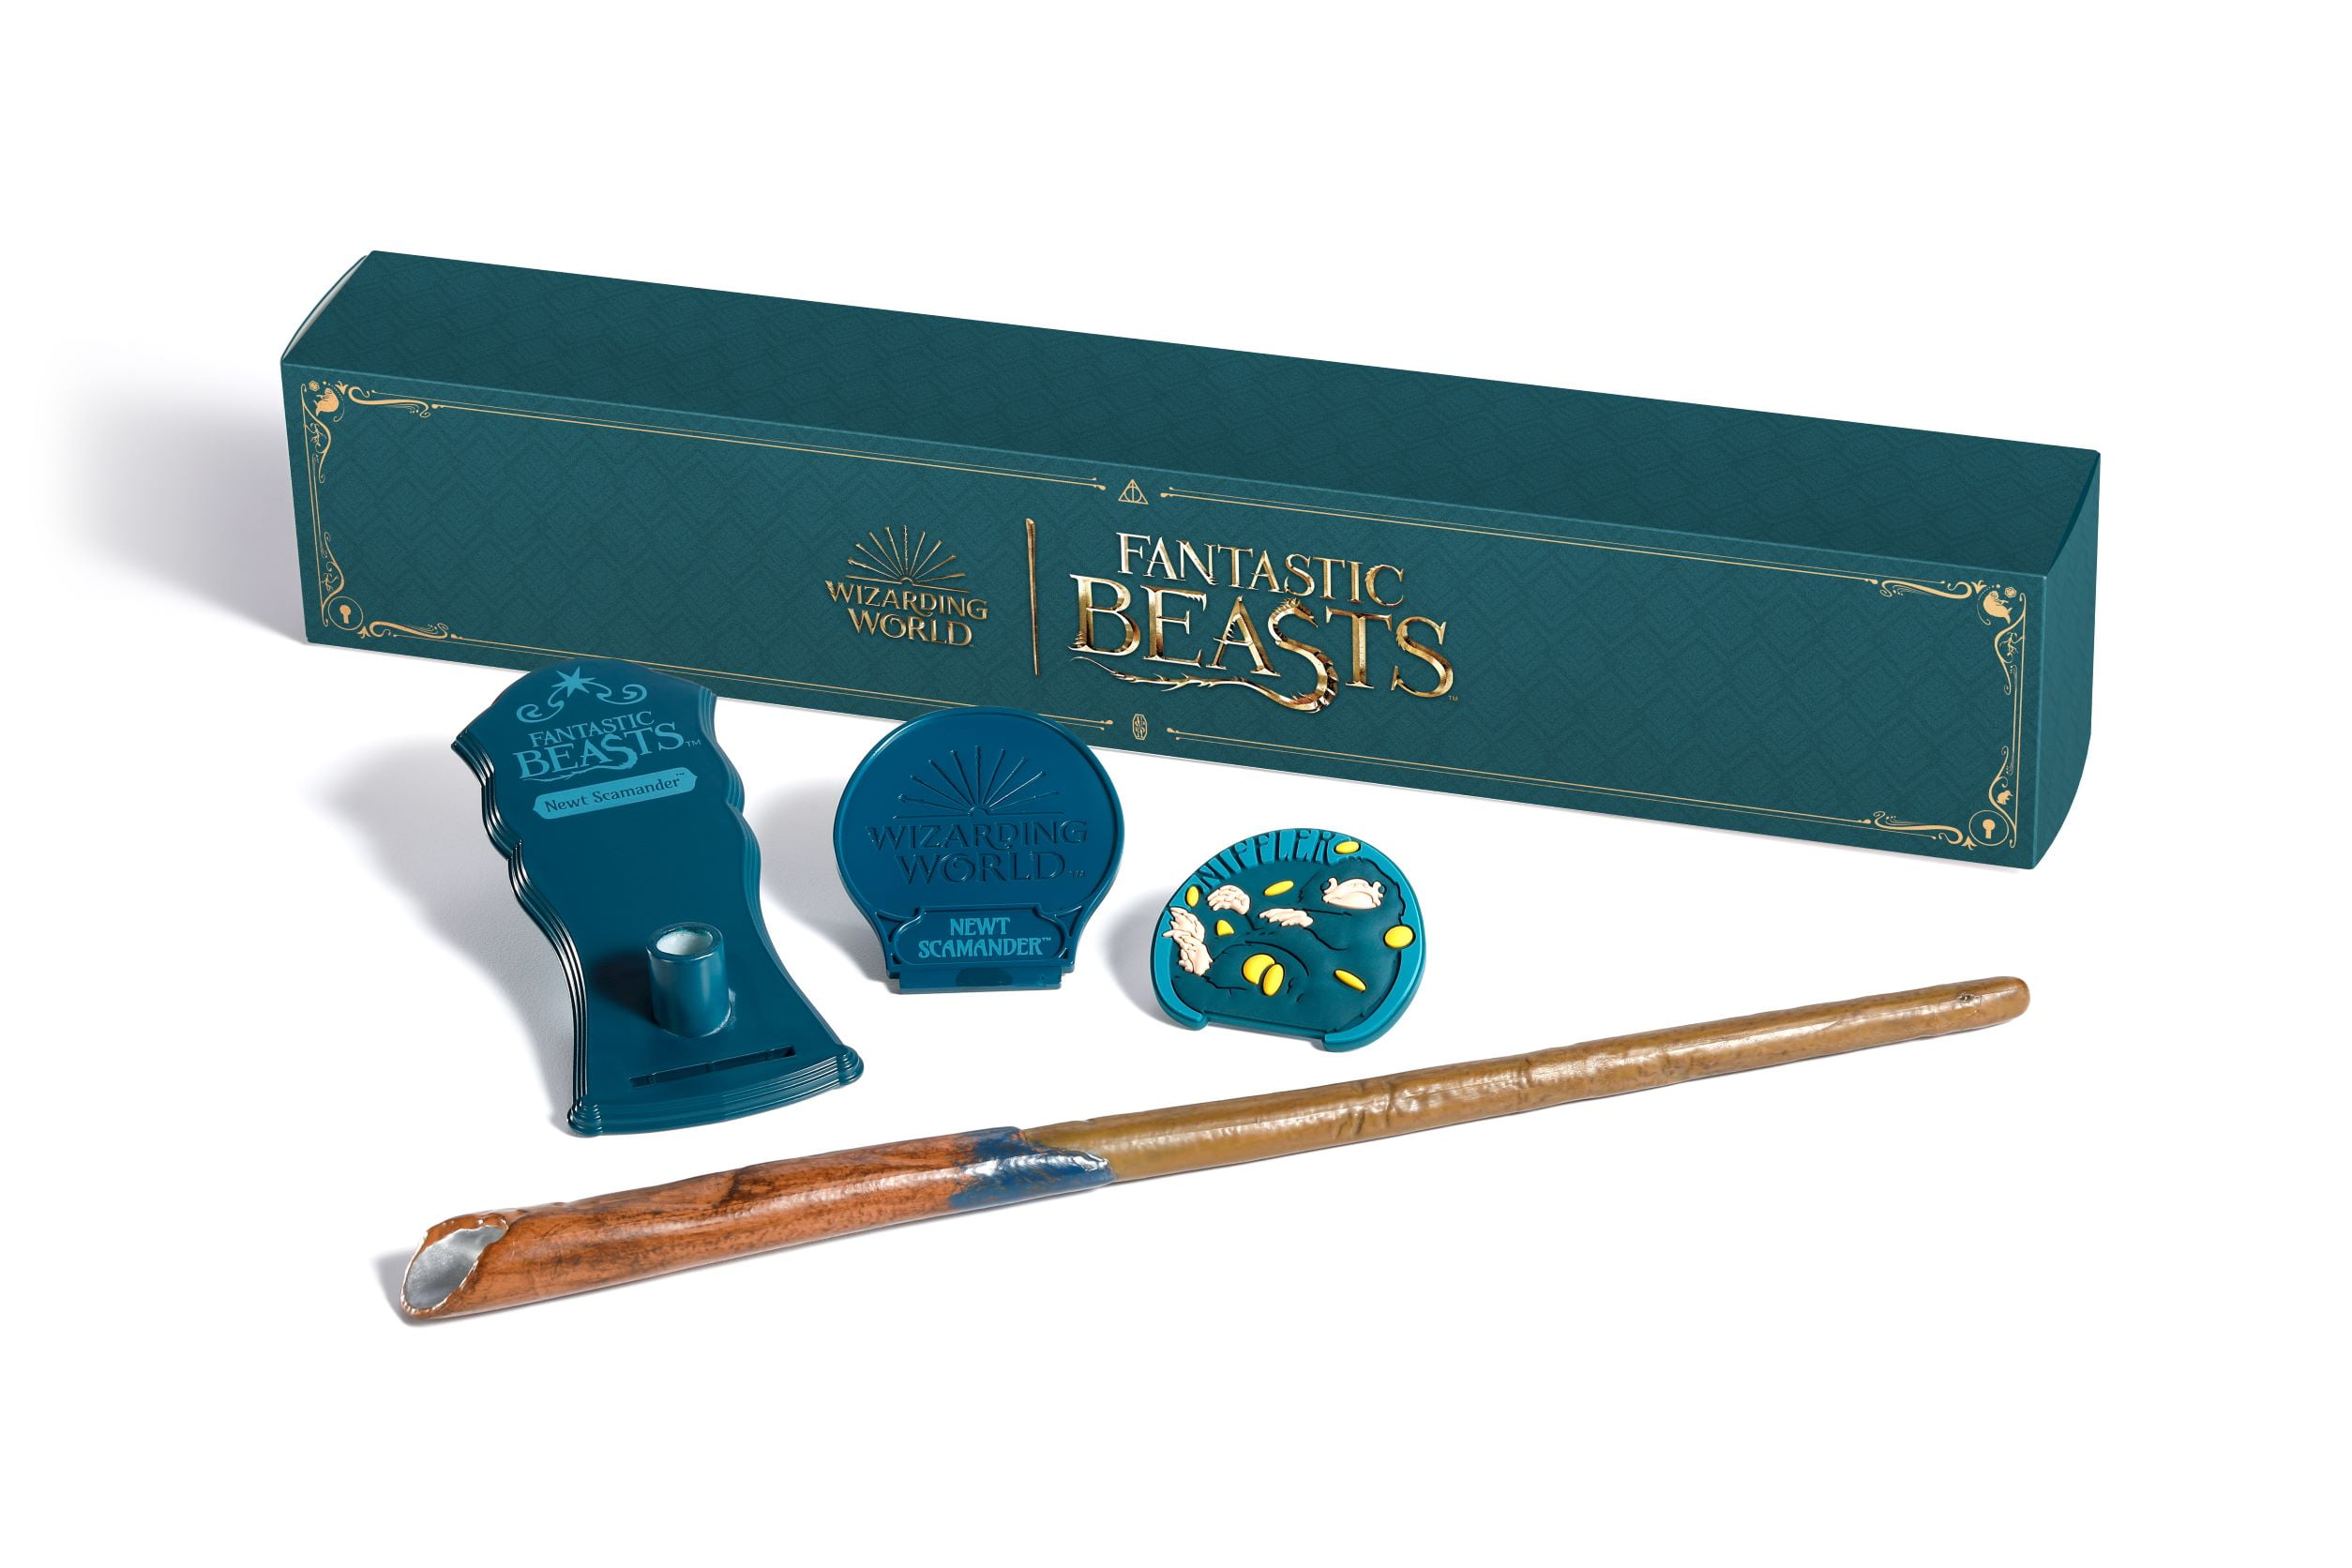 Fantastic Beasts Mystery Wands Magical Creatures Series